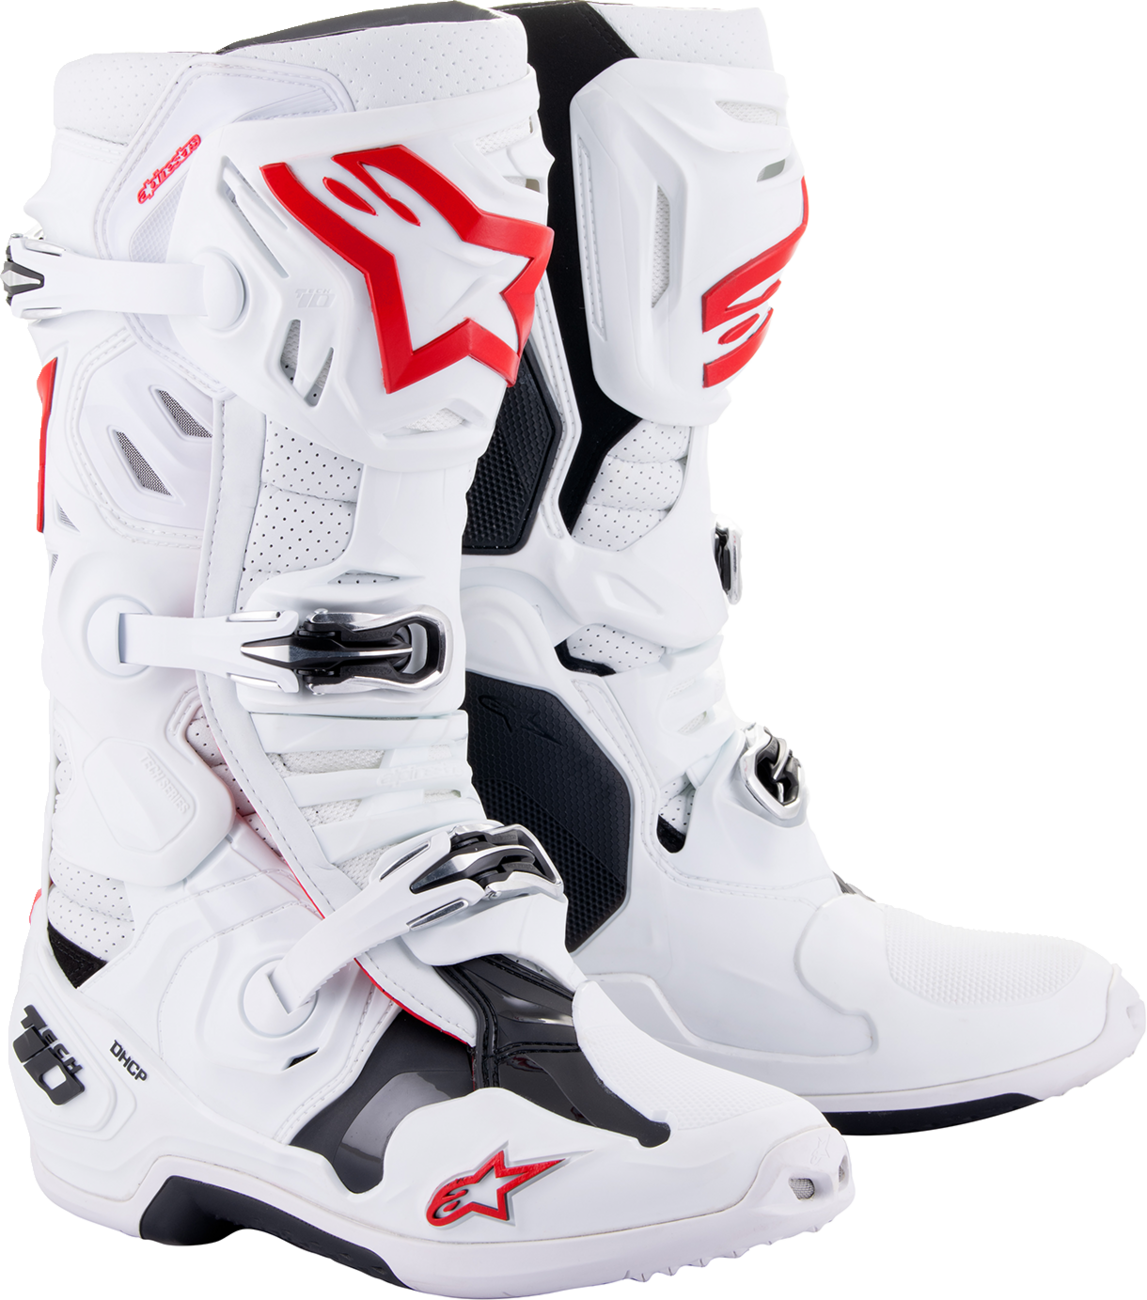 ALPINESTARS Tech 10 Supervented Boots - White/Red - US 14 2010520-2230-14